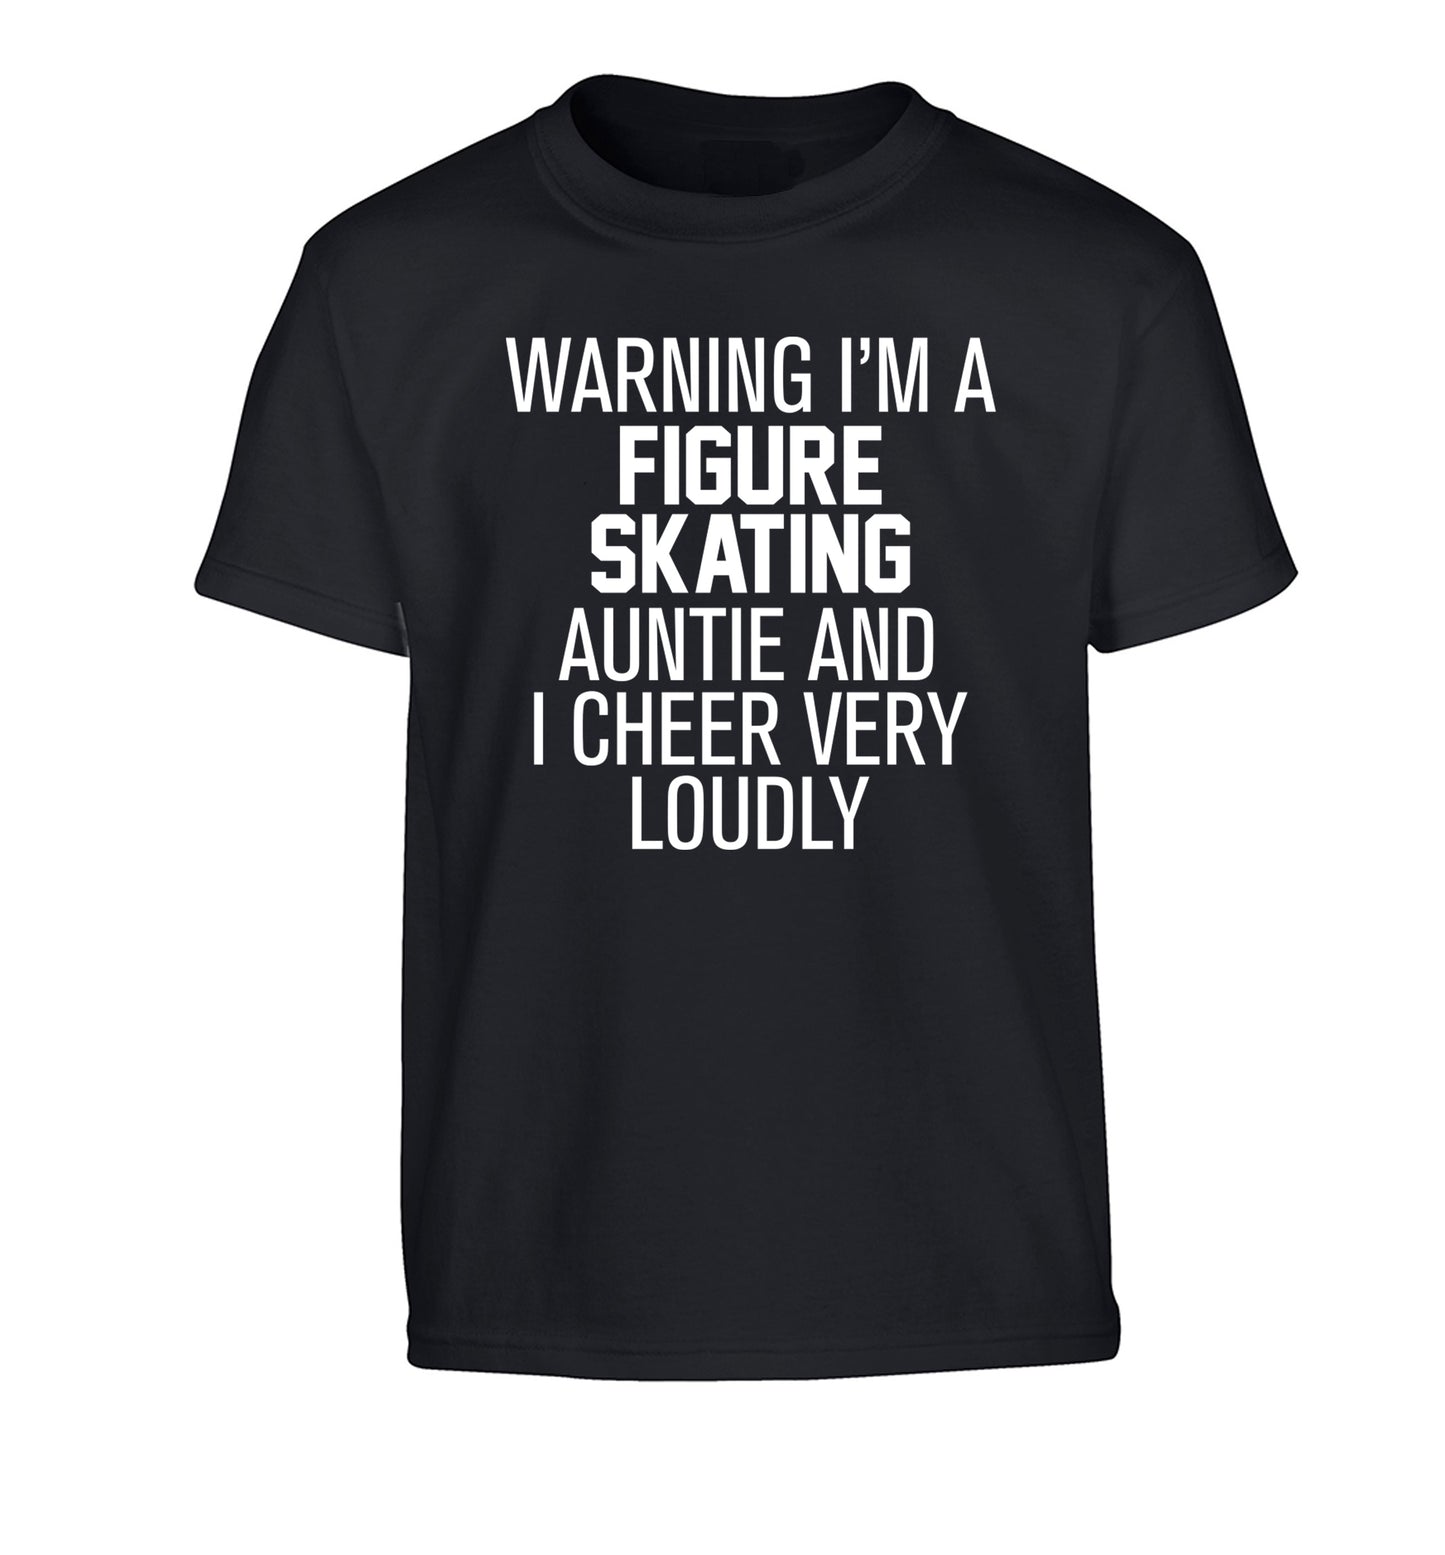 Warning I'm a figure skating auntie and I cheer very loudly Children's black Tshirt 12-14 Years